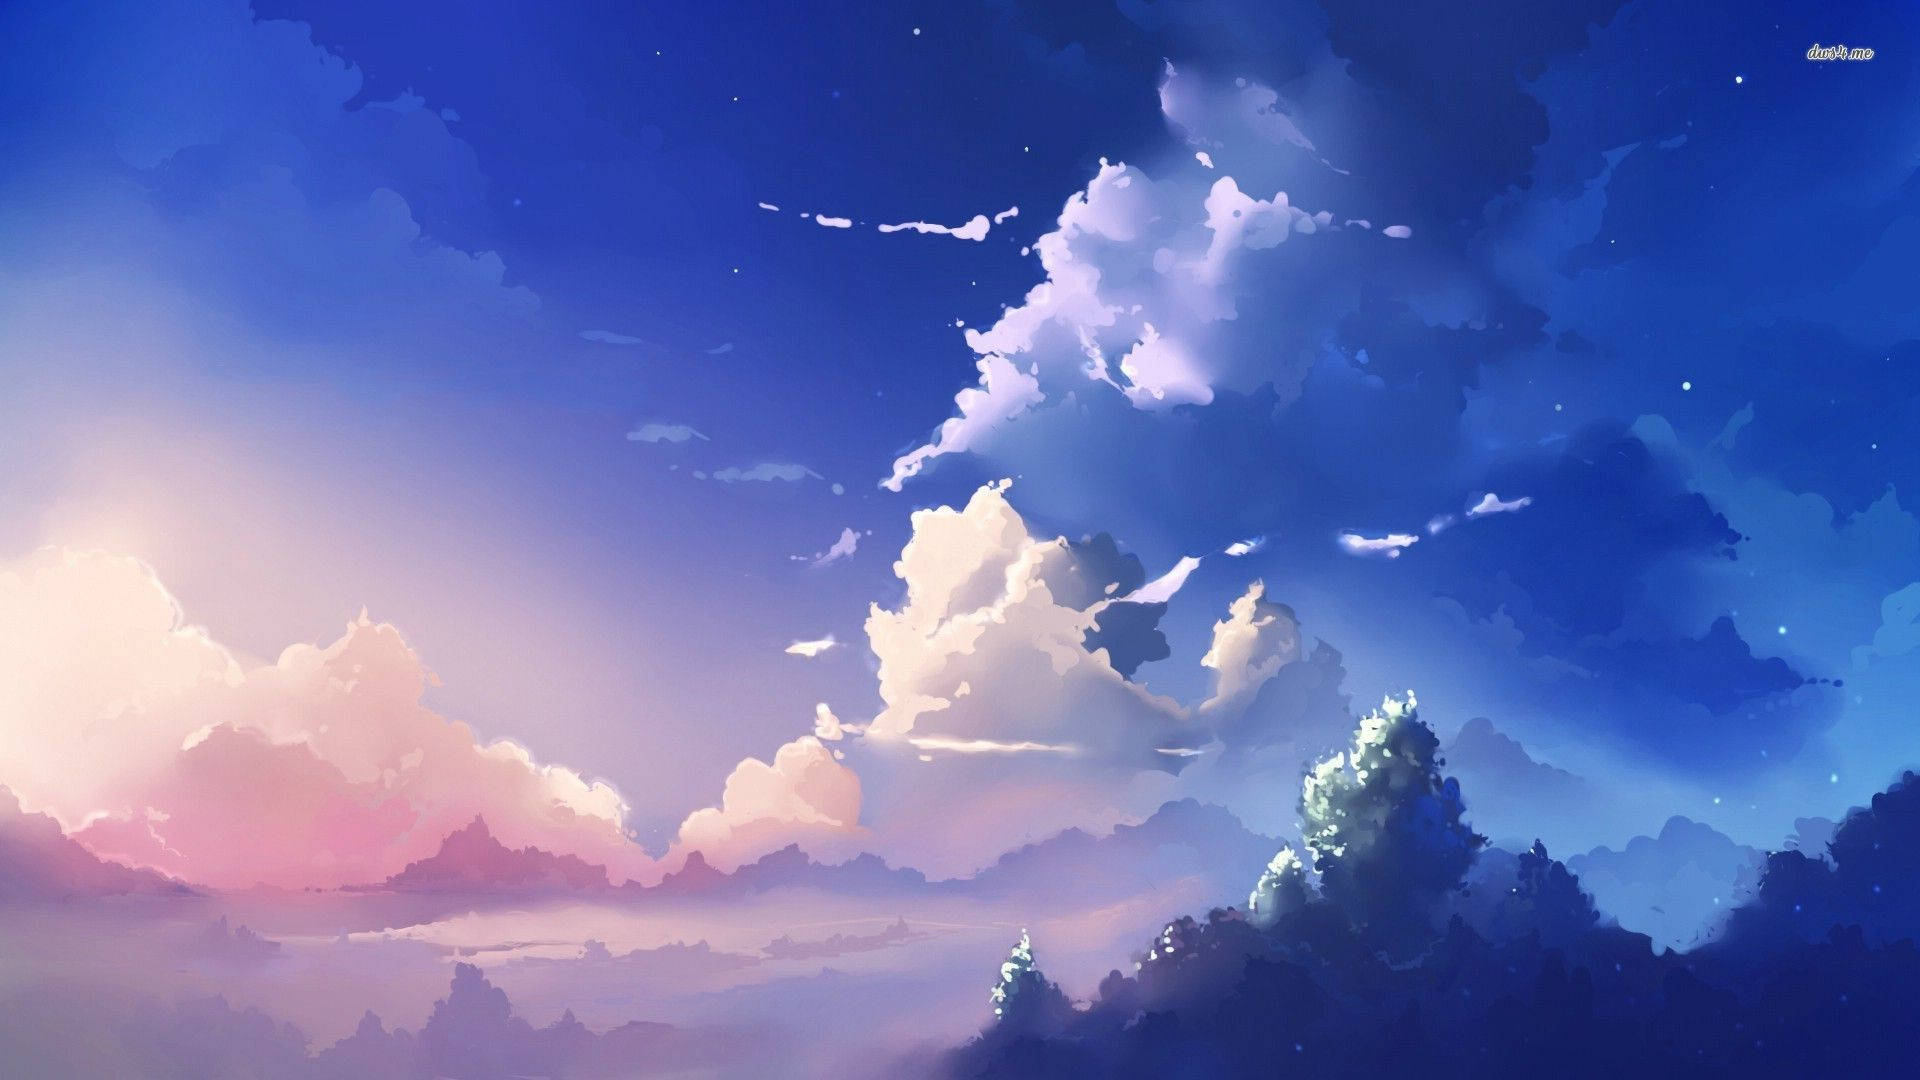 iPhone11papers.com | iPhone11 wallpaper | bd76-anime-sky -cloud-spring-art-illustration-blue